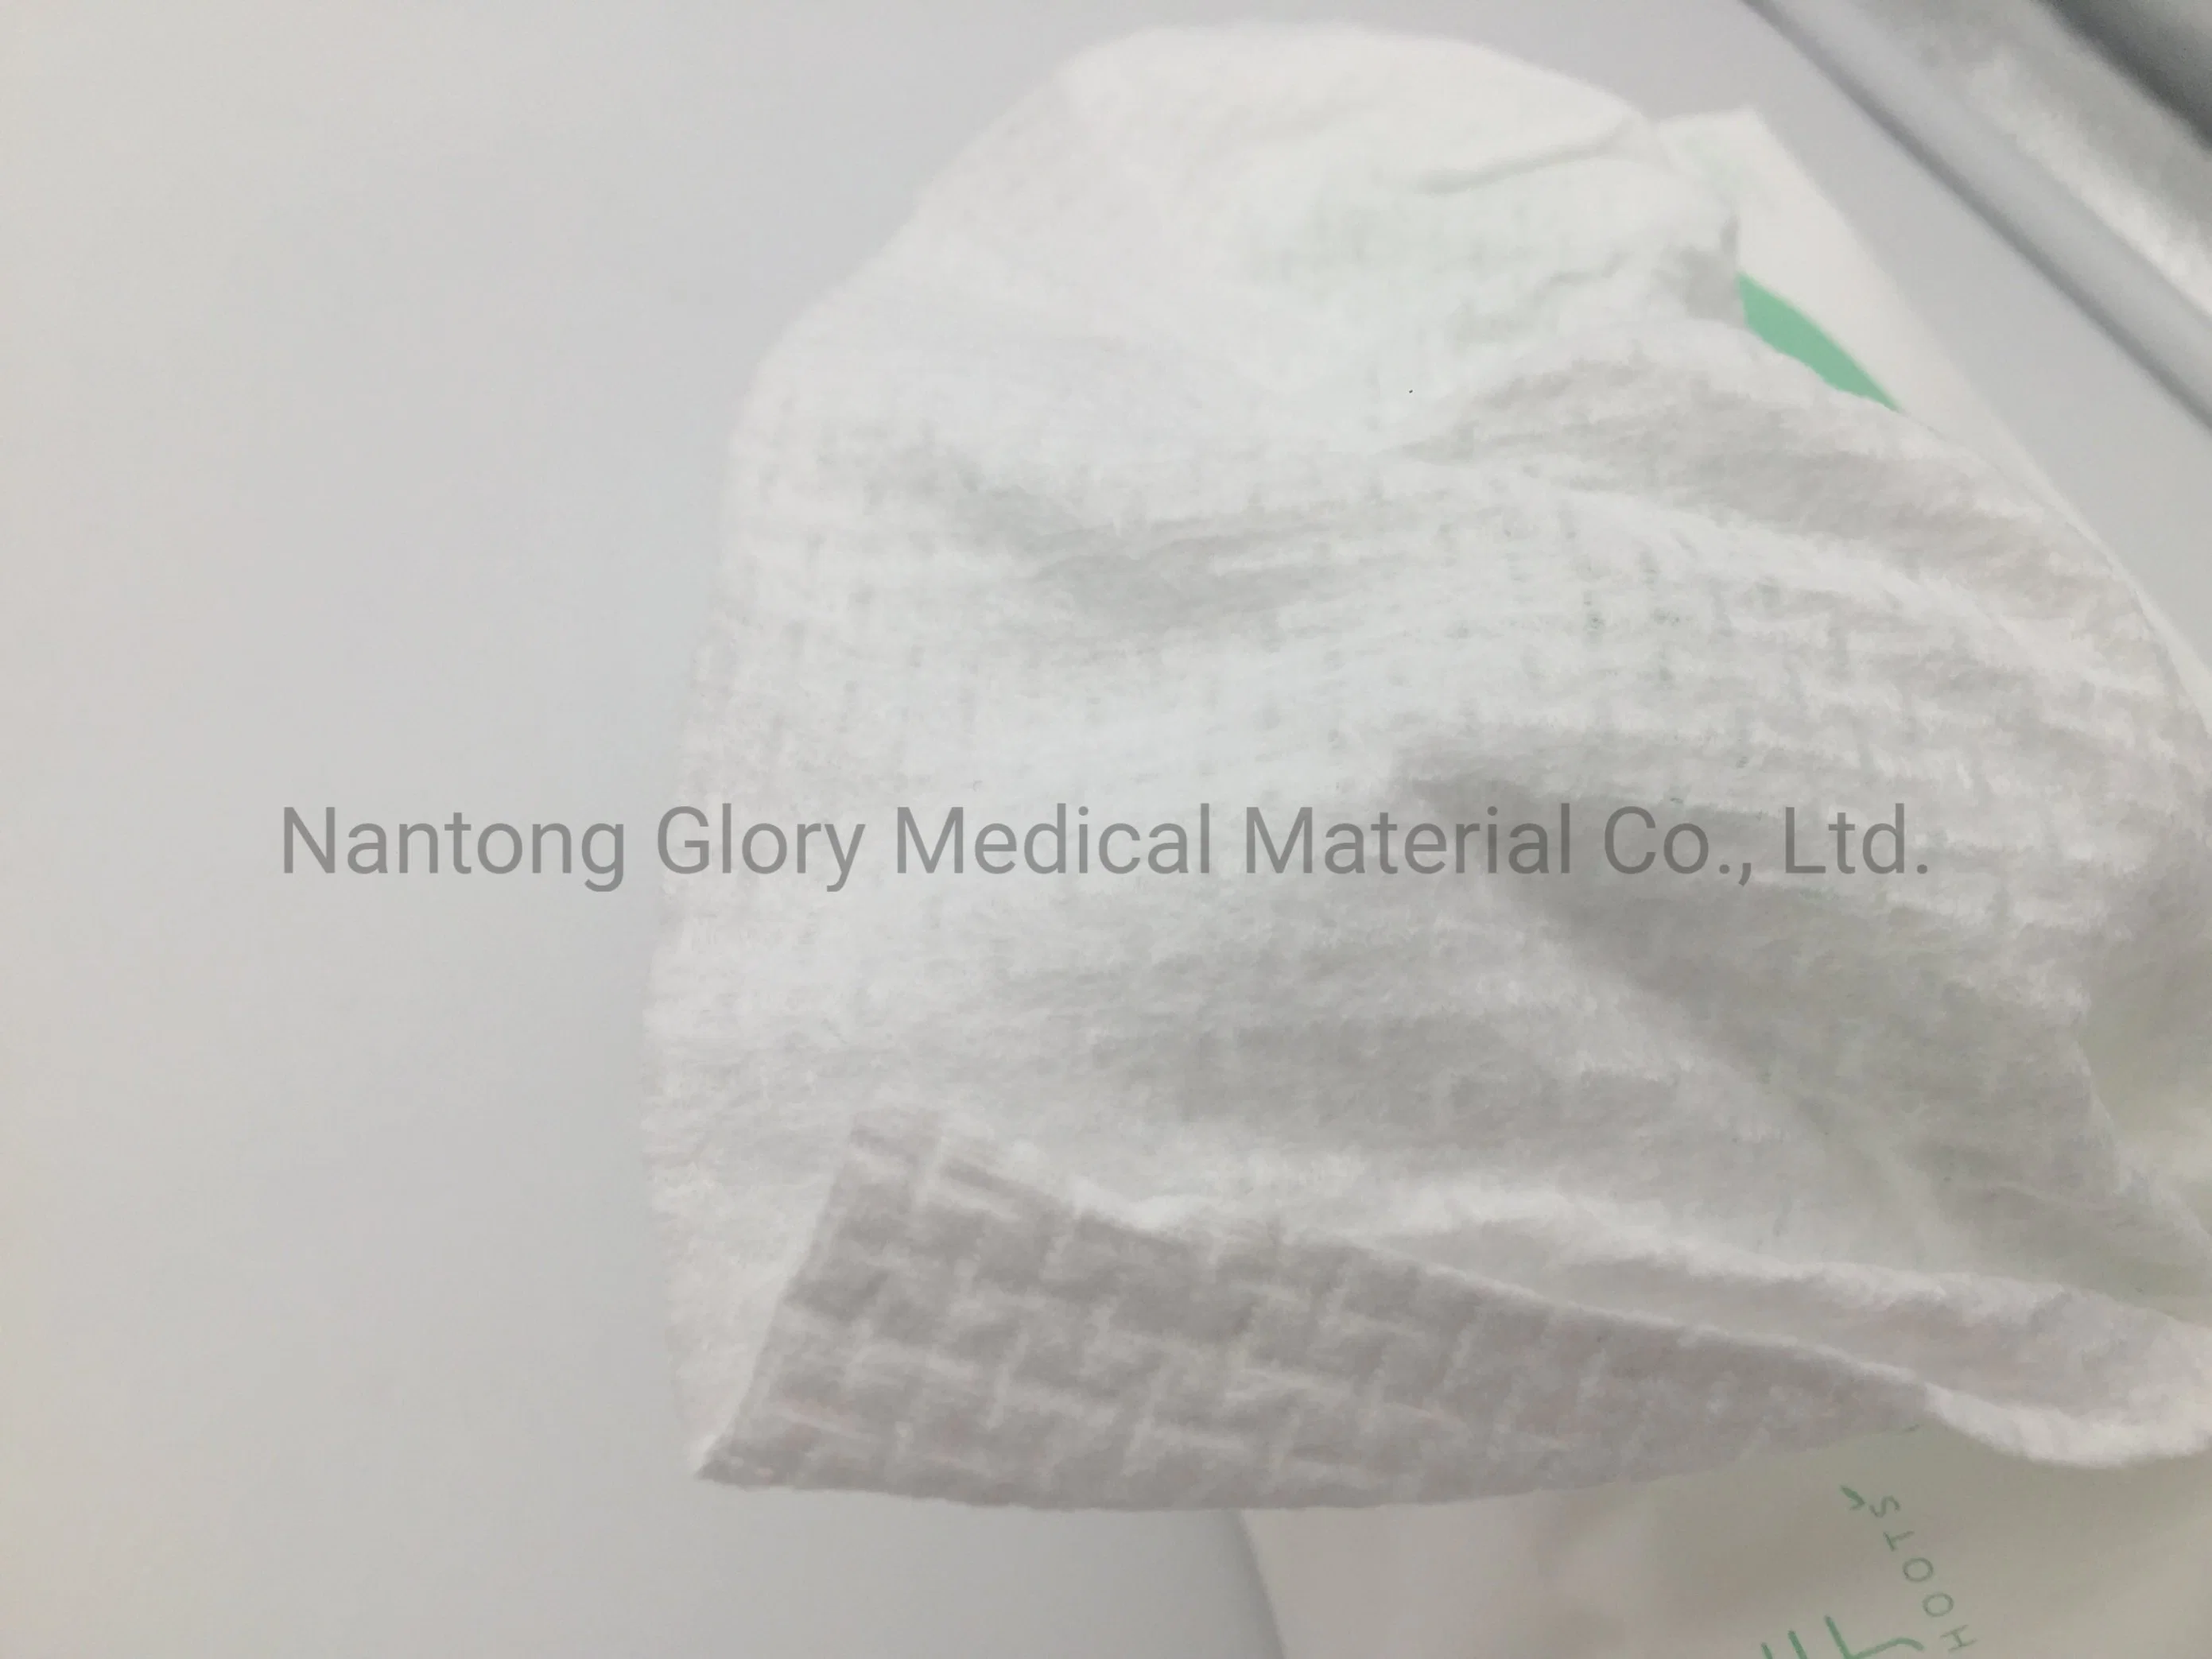 Cotton Soft Facial Cleansing Towel White Tissue Paper